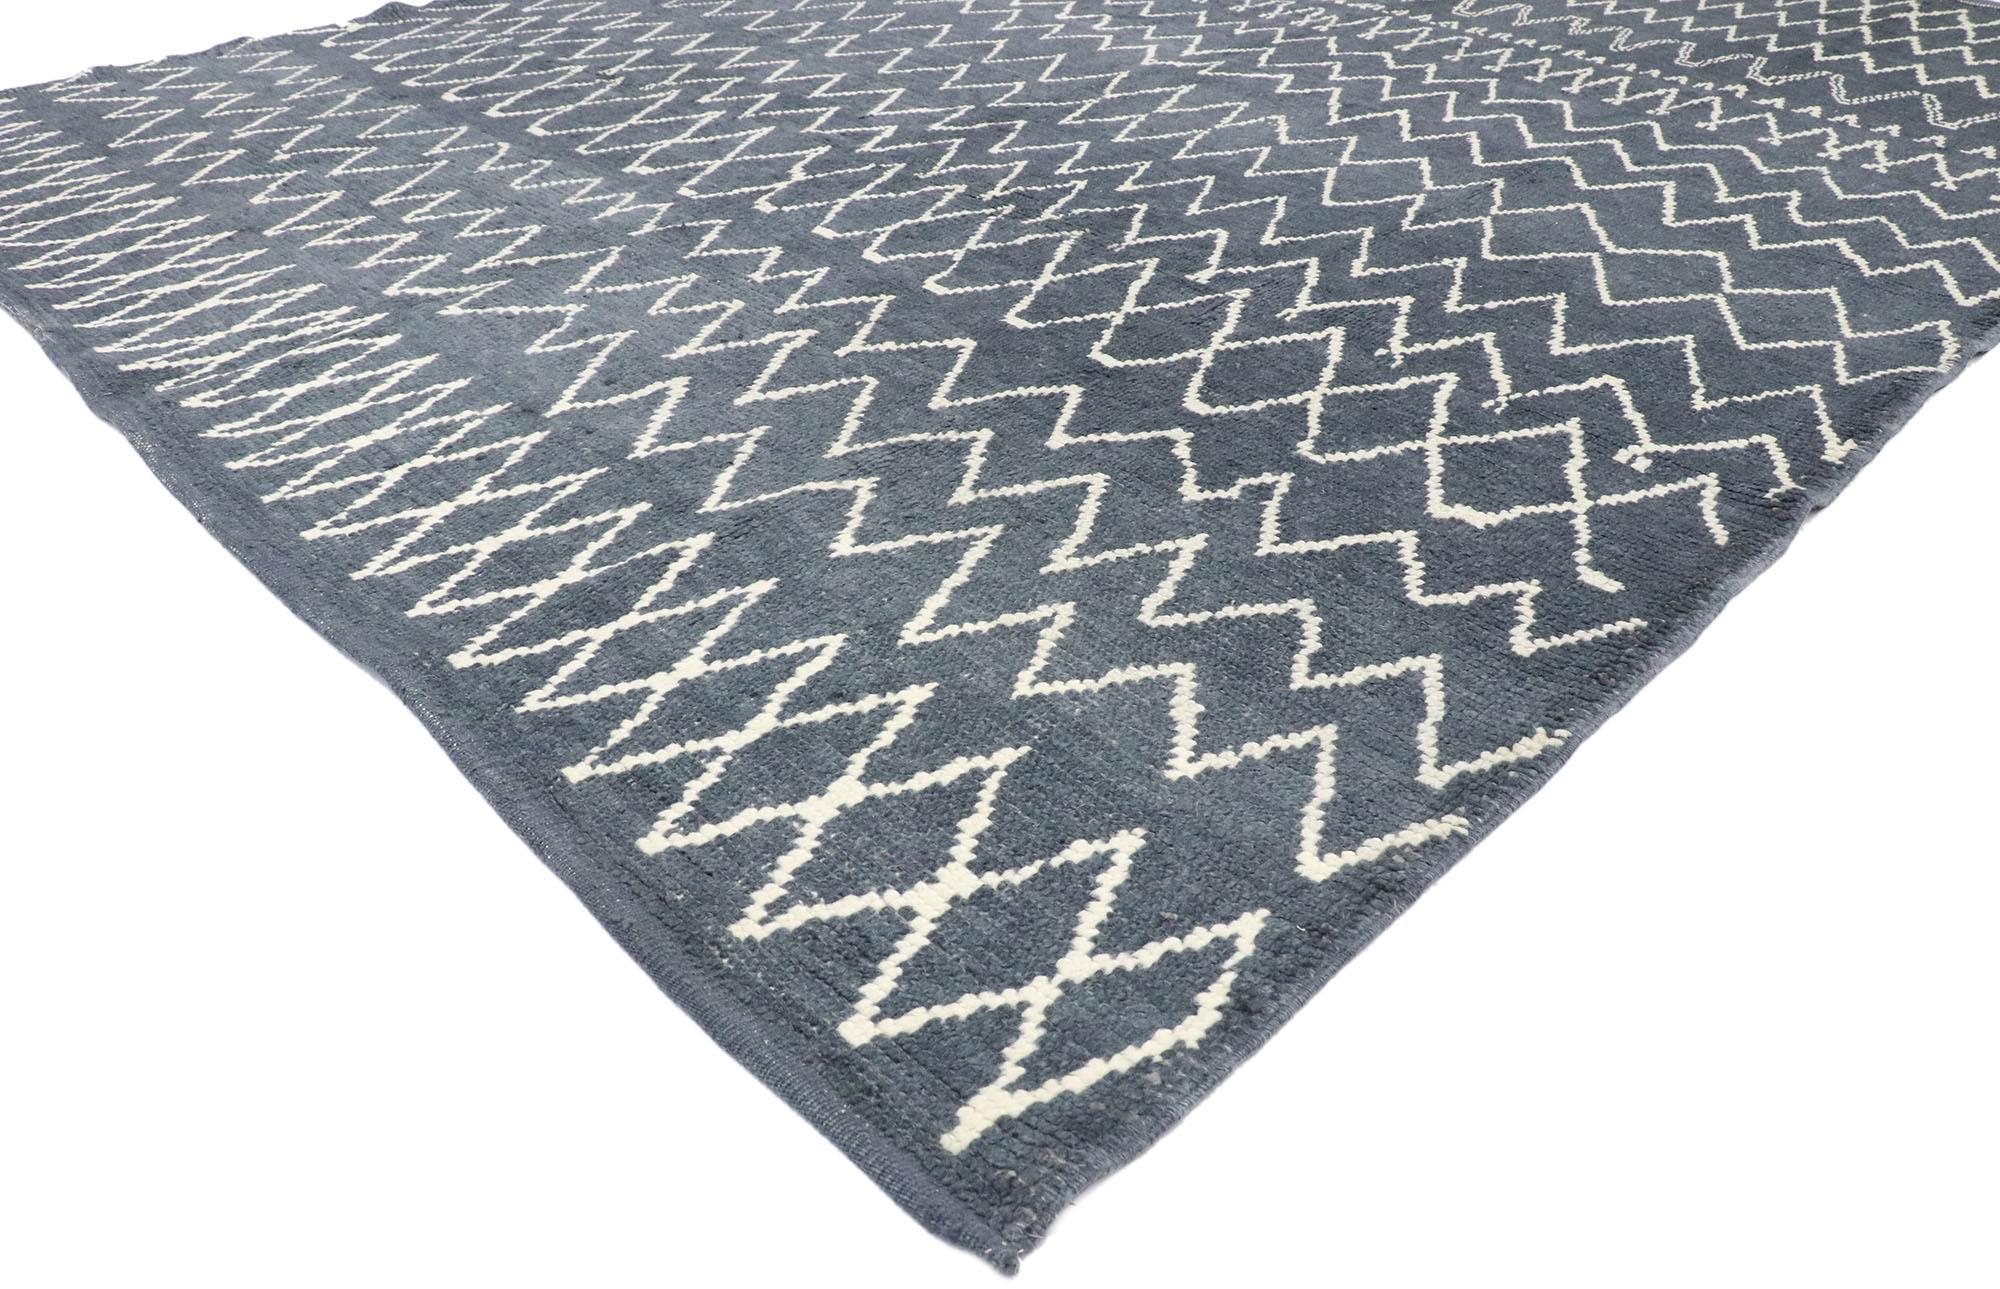 53447, new contemporary Moroccan style rug with diamond pattern and chevron design. Softer yet no less striking, this hand knotted wool contemporary Moroccan rug embodies cozy boho chic tribal style with hygge vibes. The Moroccan style rug features